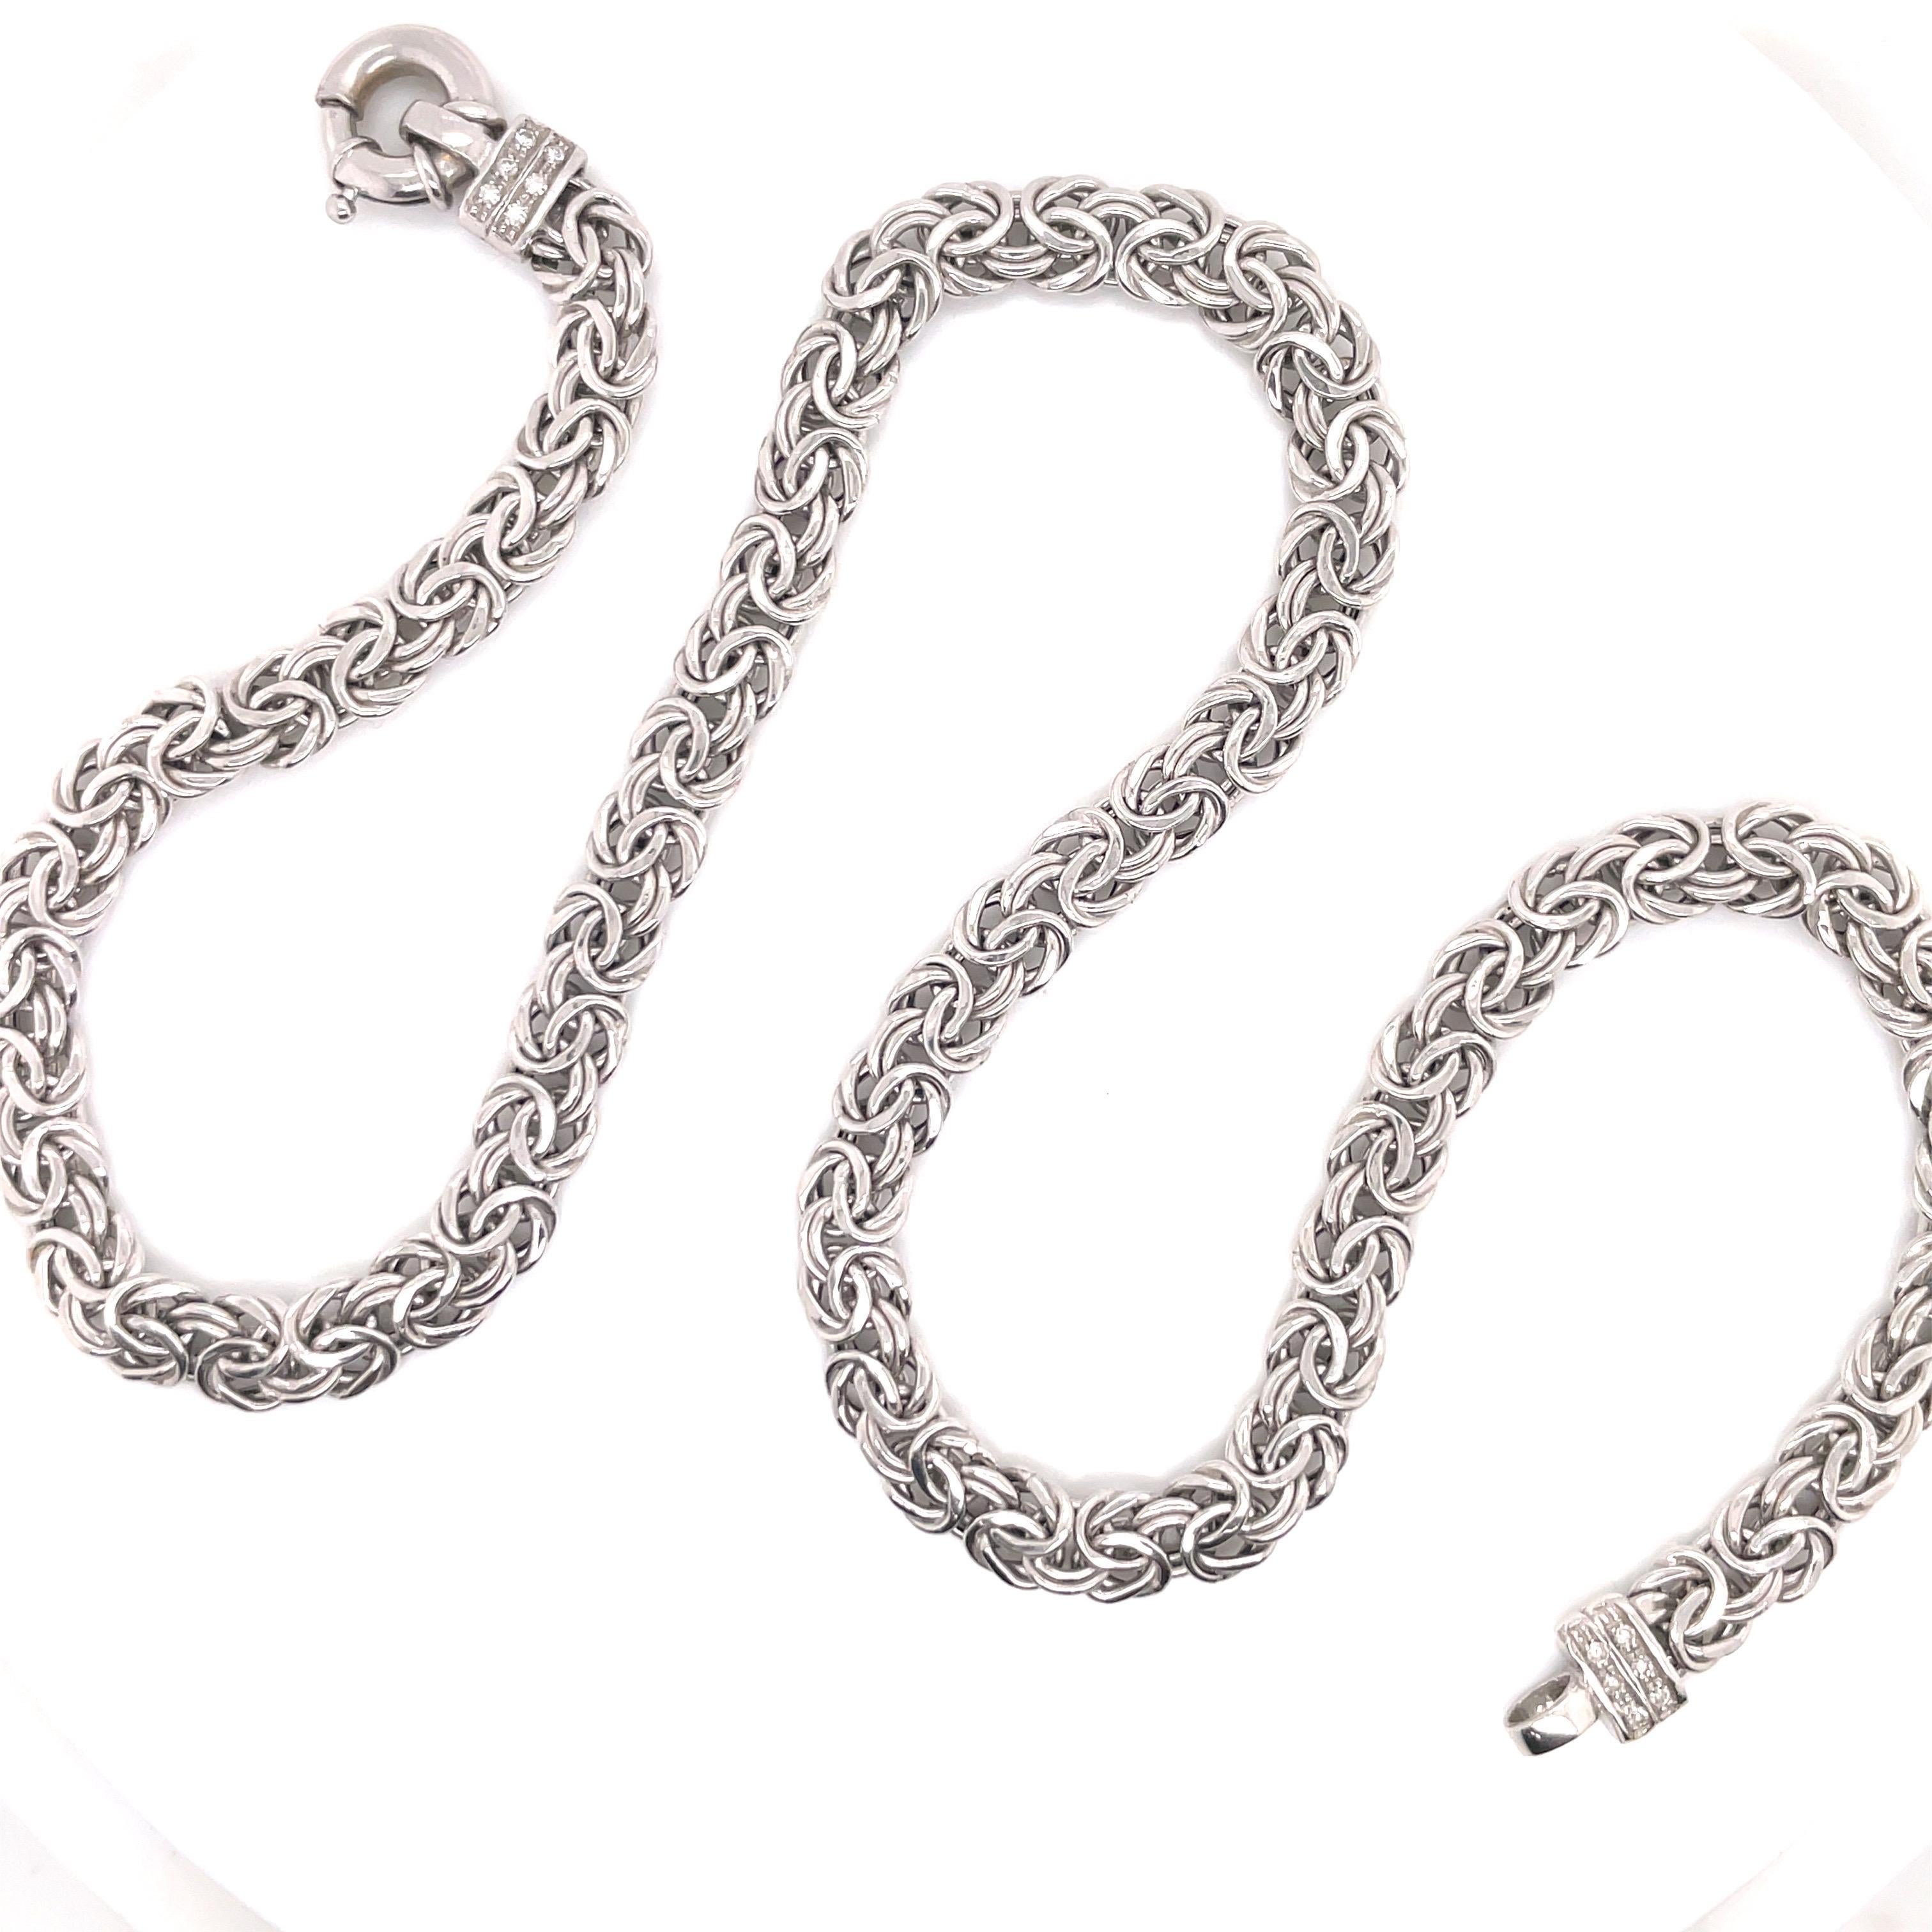 14 Karat White Gold necklace featuring a Byzantine motif link weighing 17.8 grams, 18 inches. 
Made in Italy